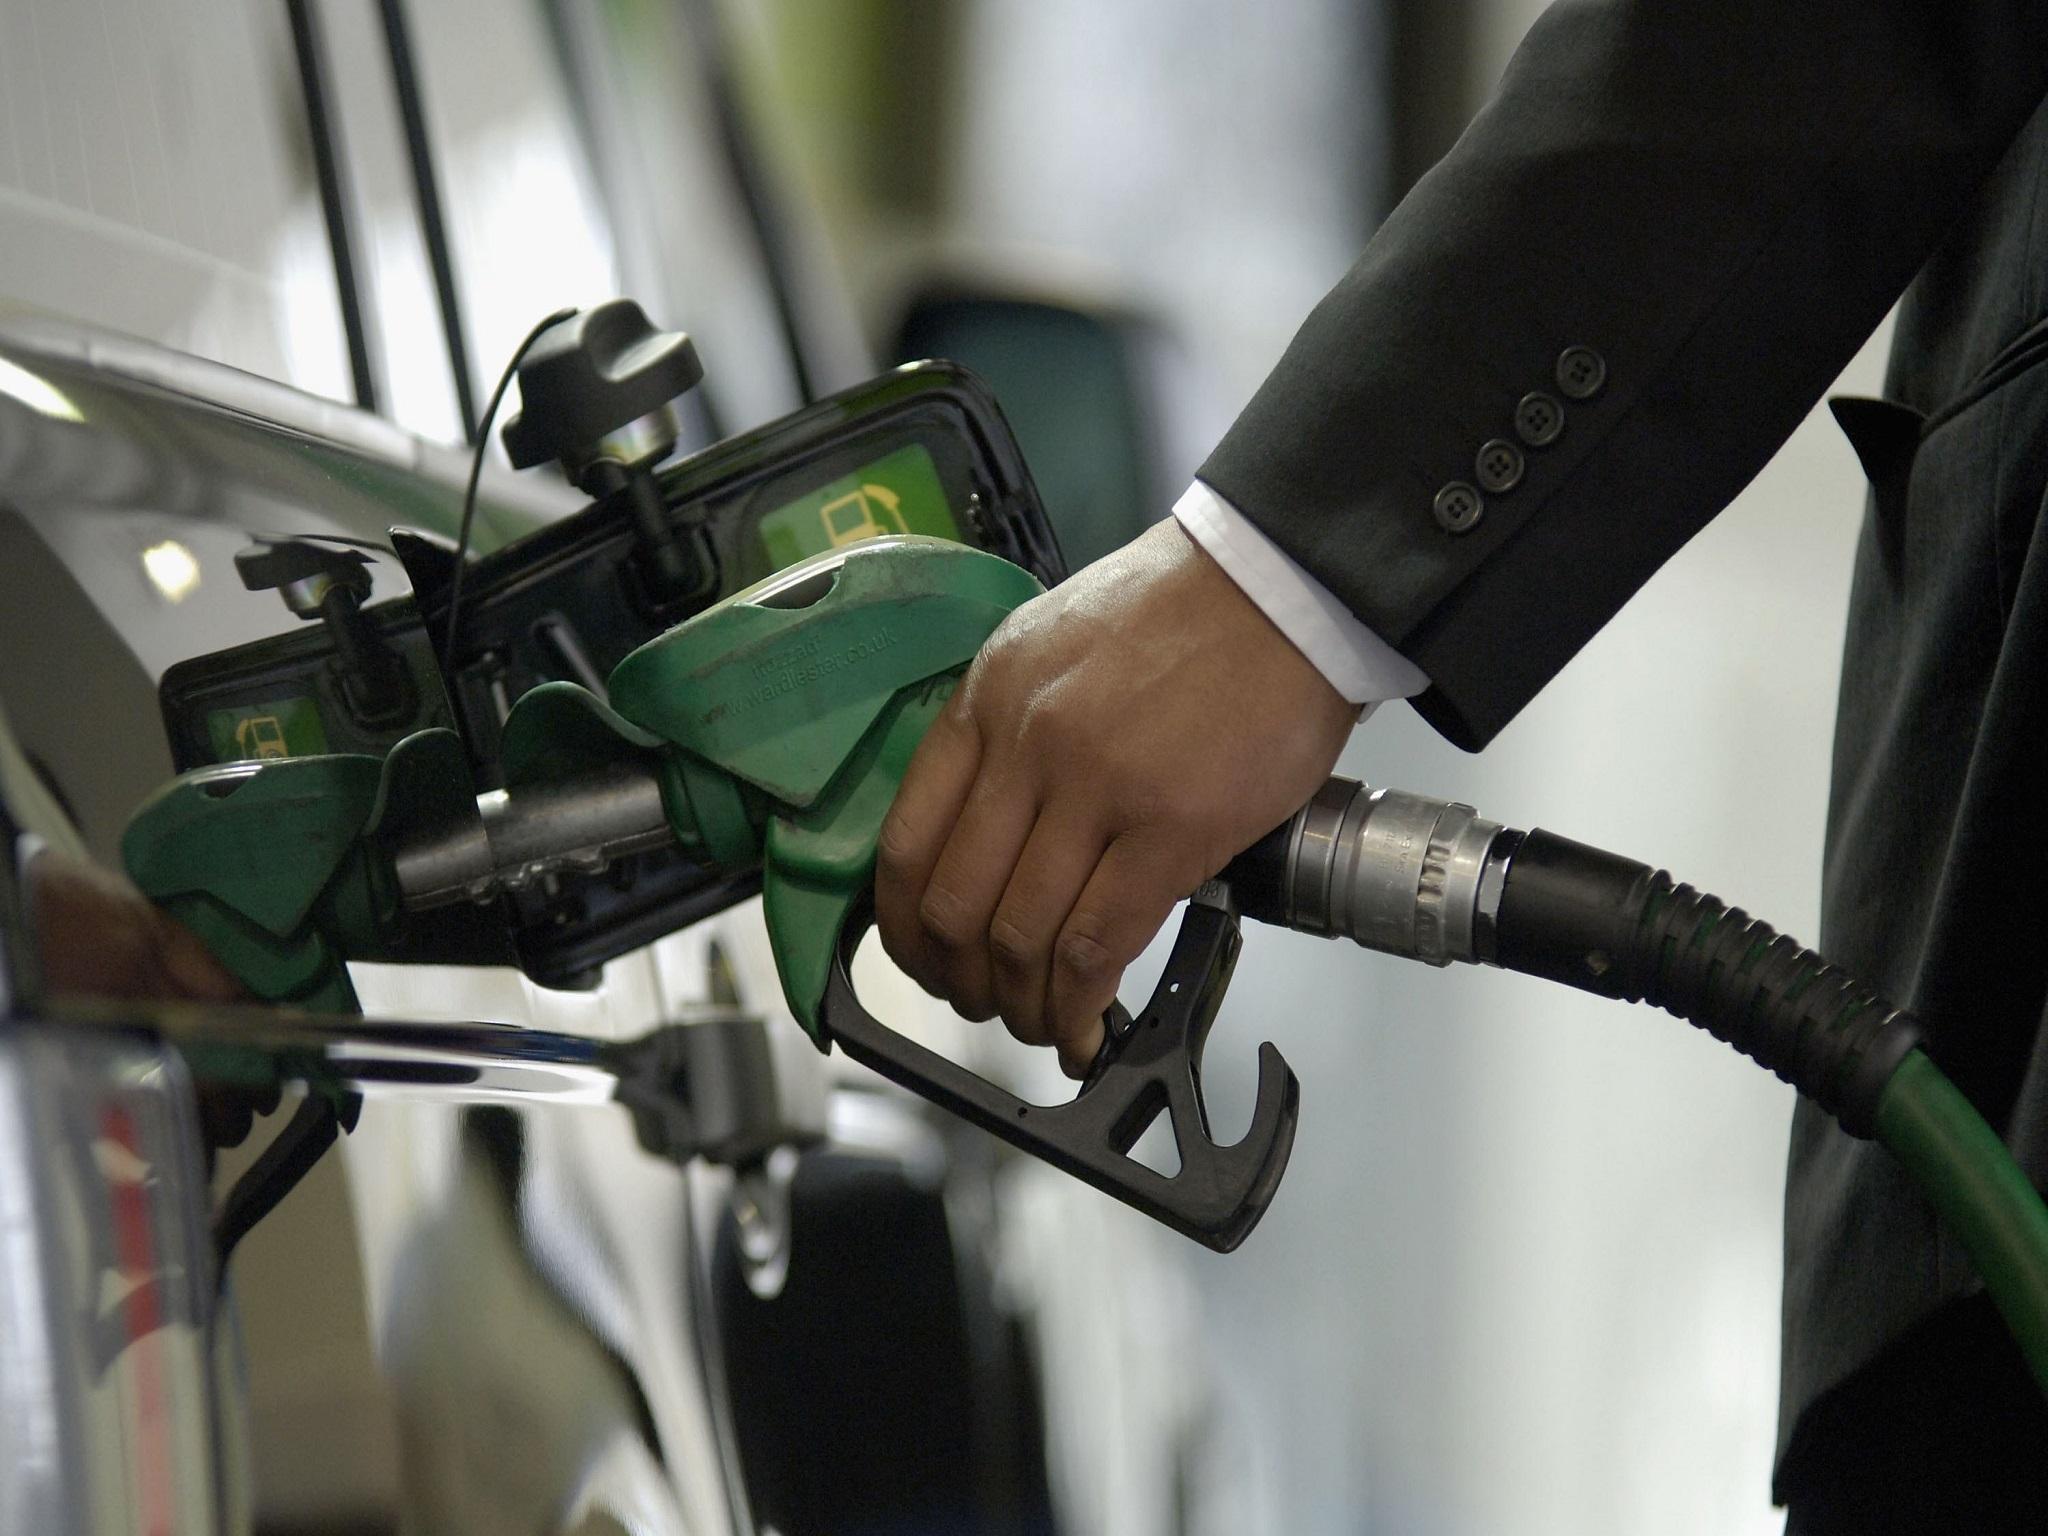 The largest downward contribution to the change in the inflation rate from a year ago came from prices for motor fuels